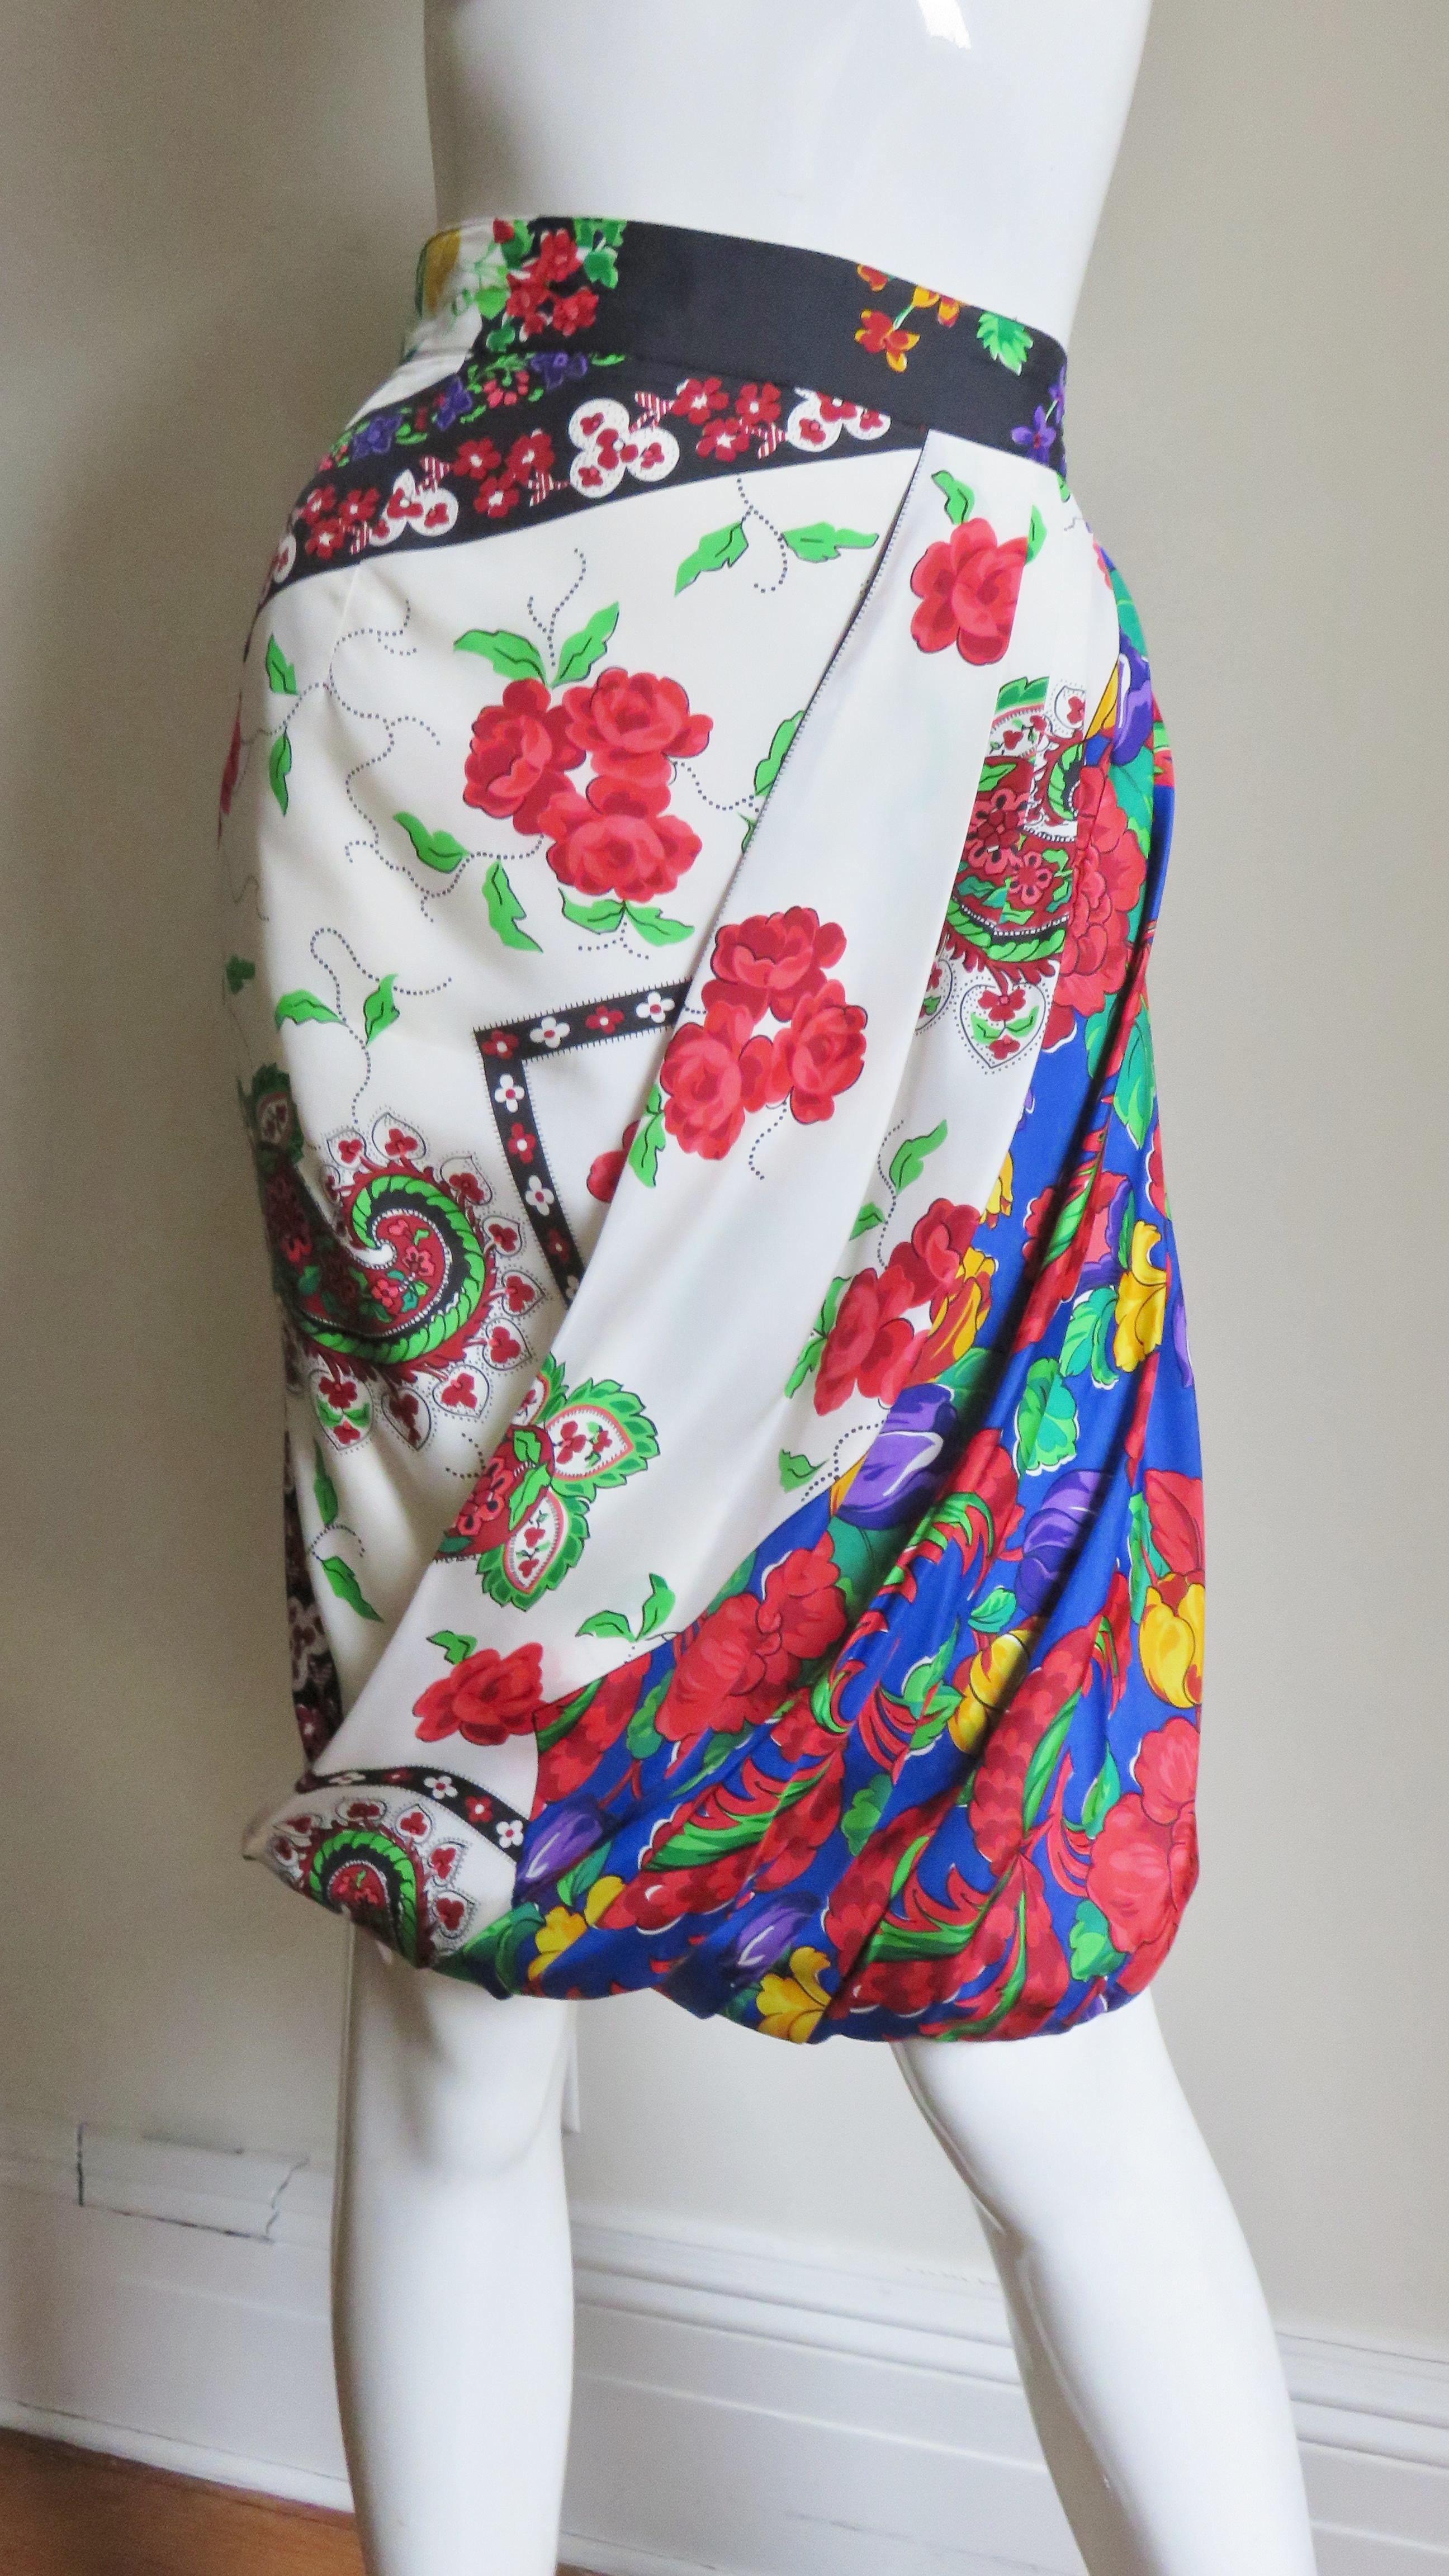 Gianni Versace Mixed Flower Print Silk Skirt 1980s In Excellent Condition For Sale In Water Mill, NY